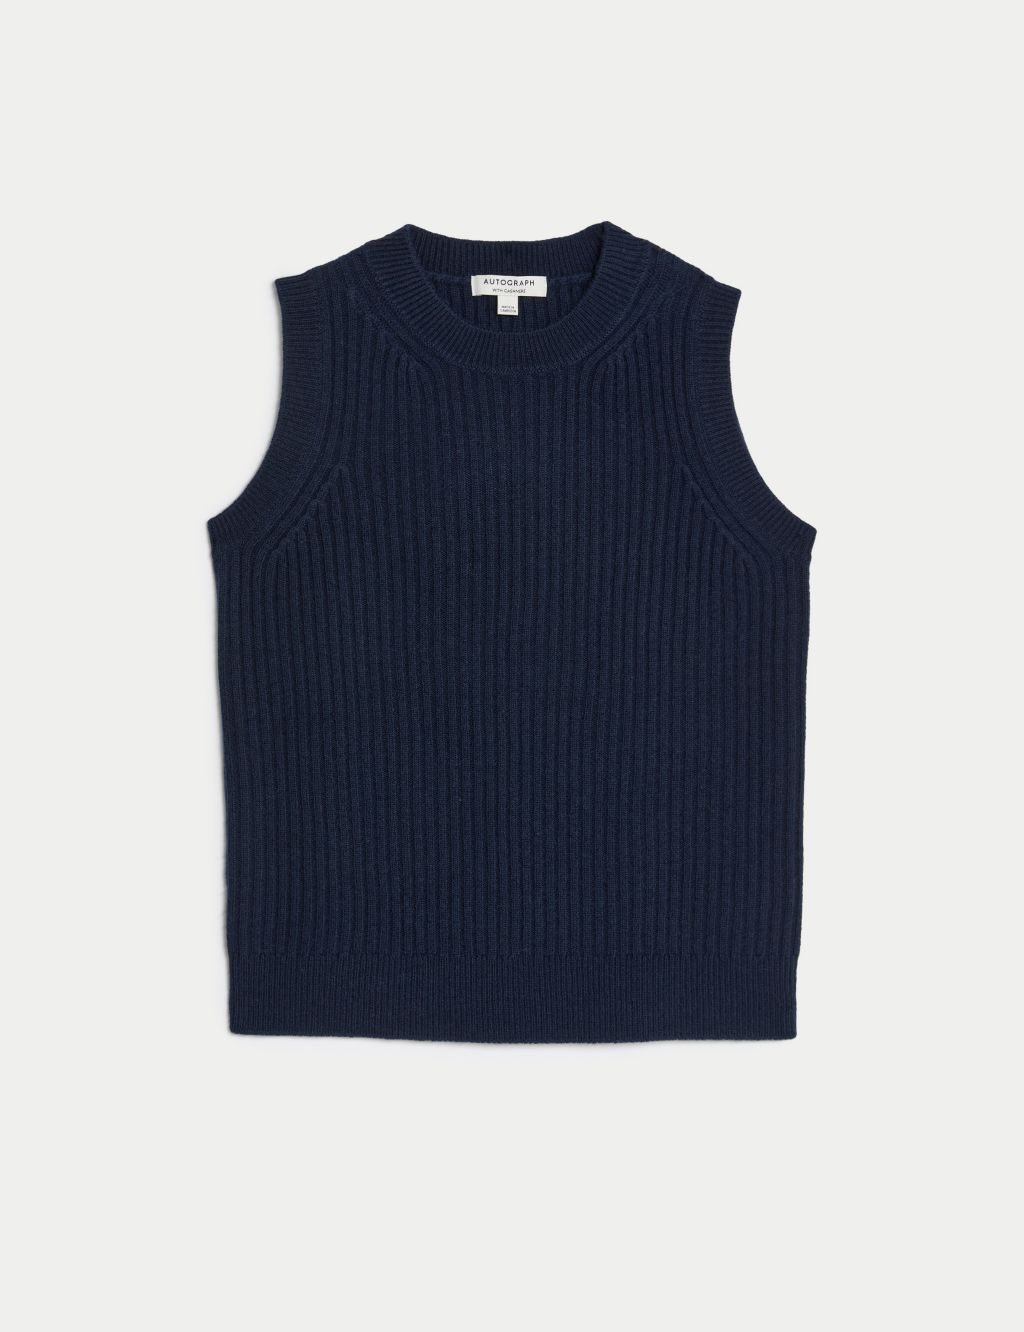 Merino Wool With Cashmere Knitted Vest image 2